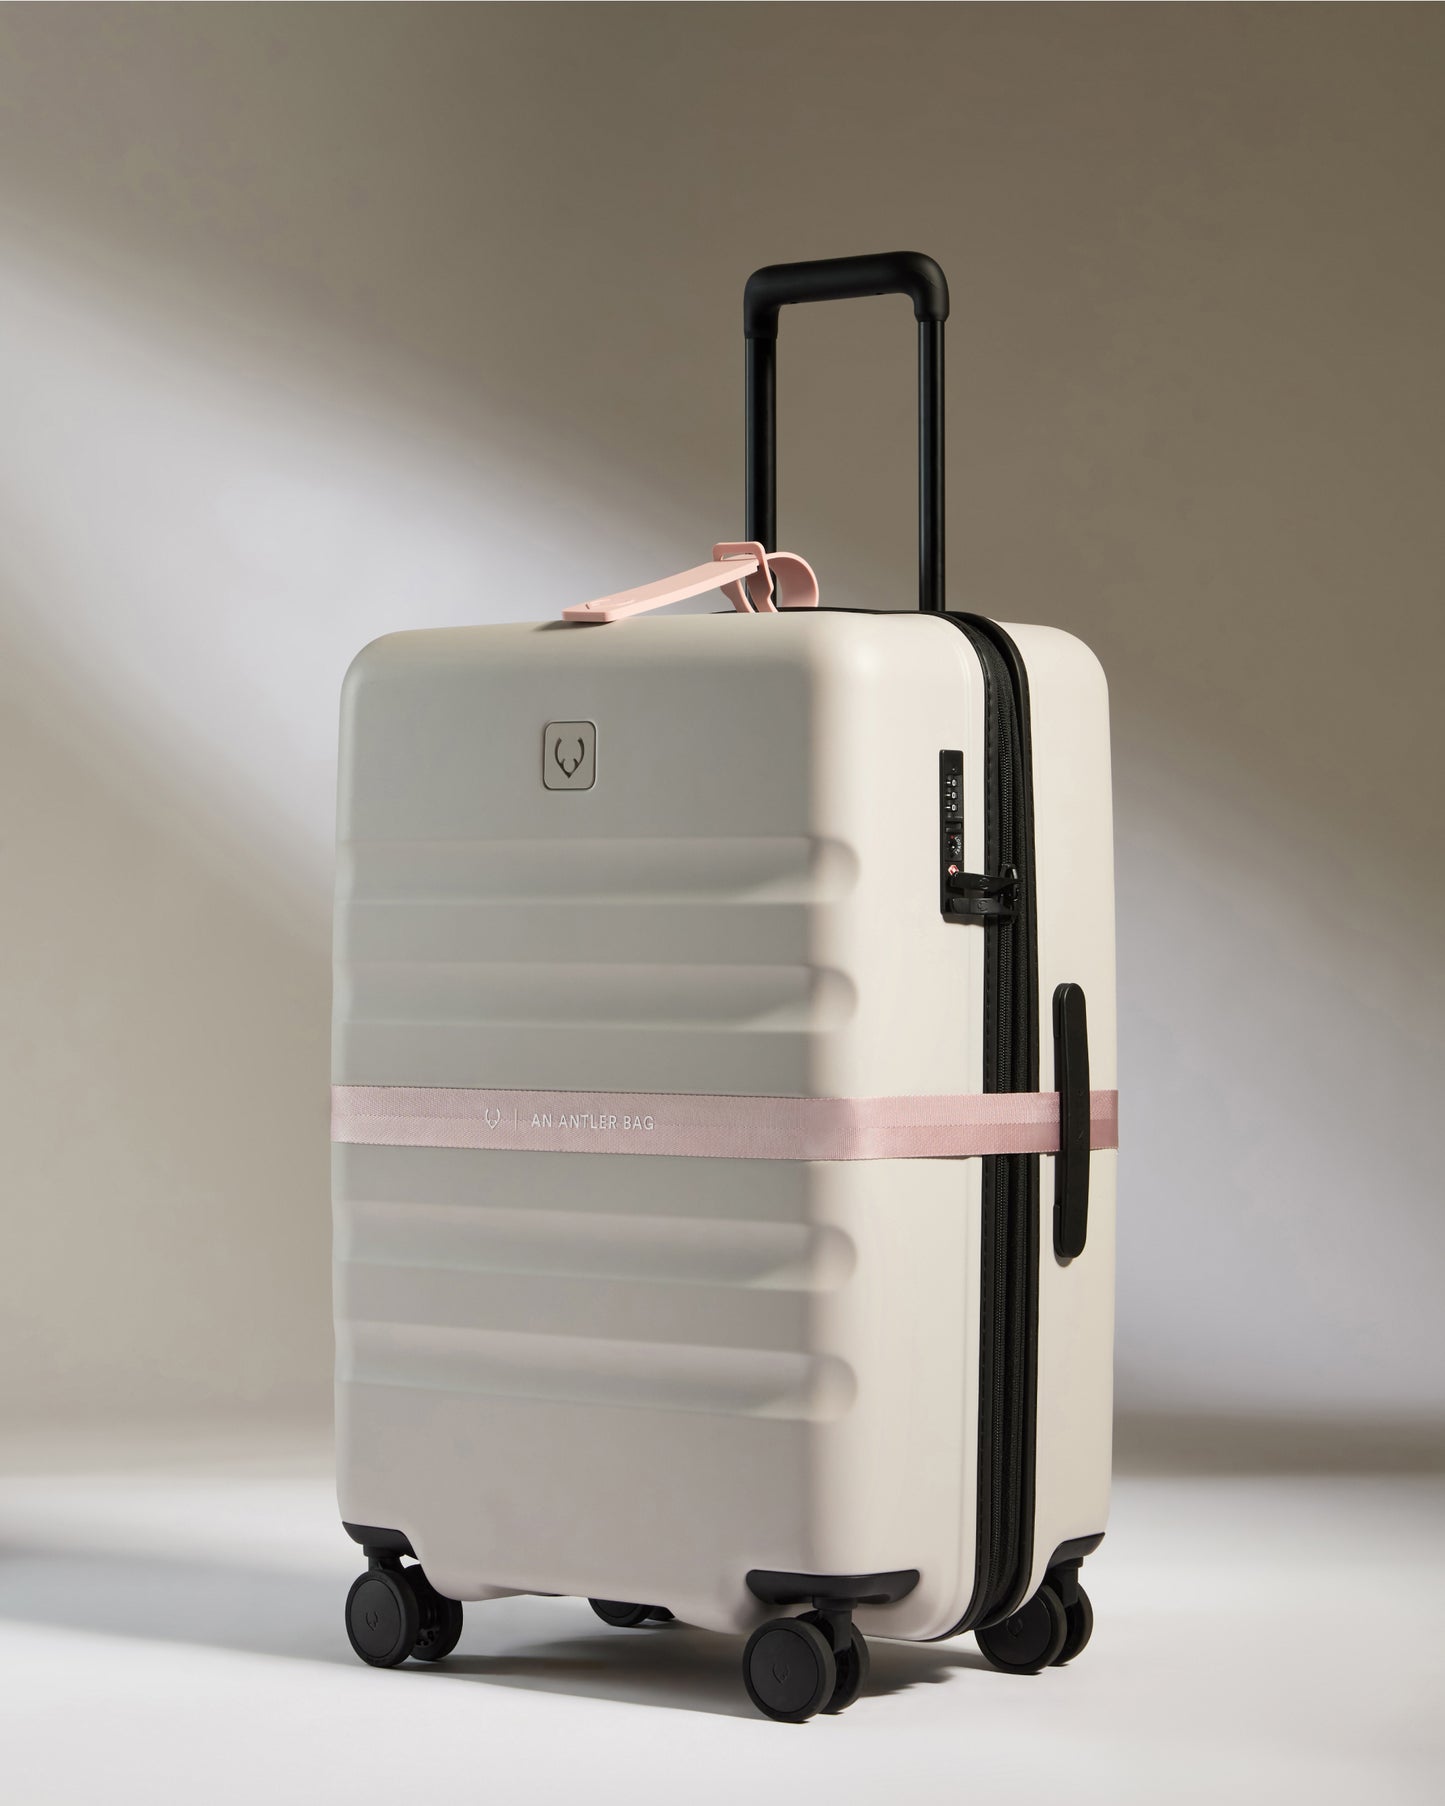 Luggage Strap in Moorland Pink